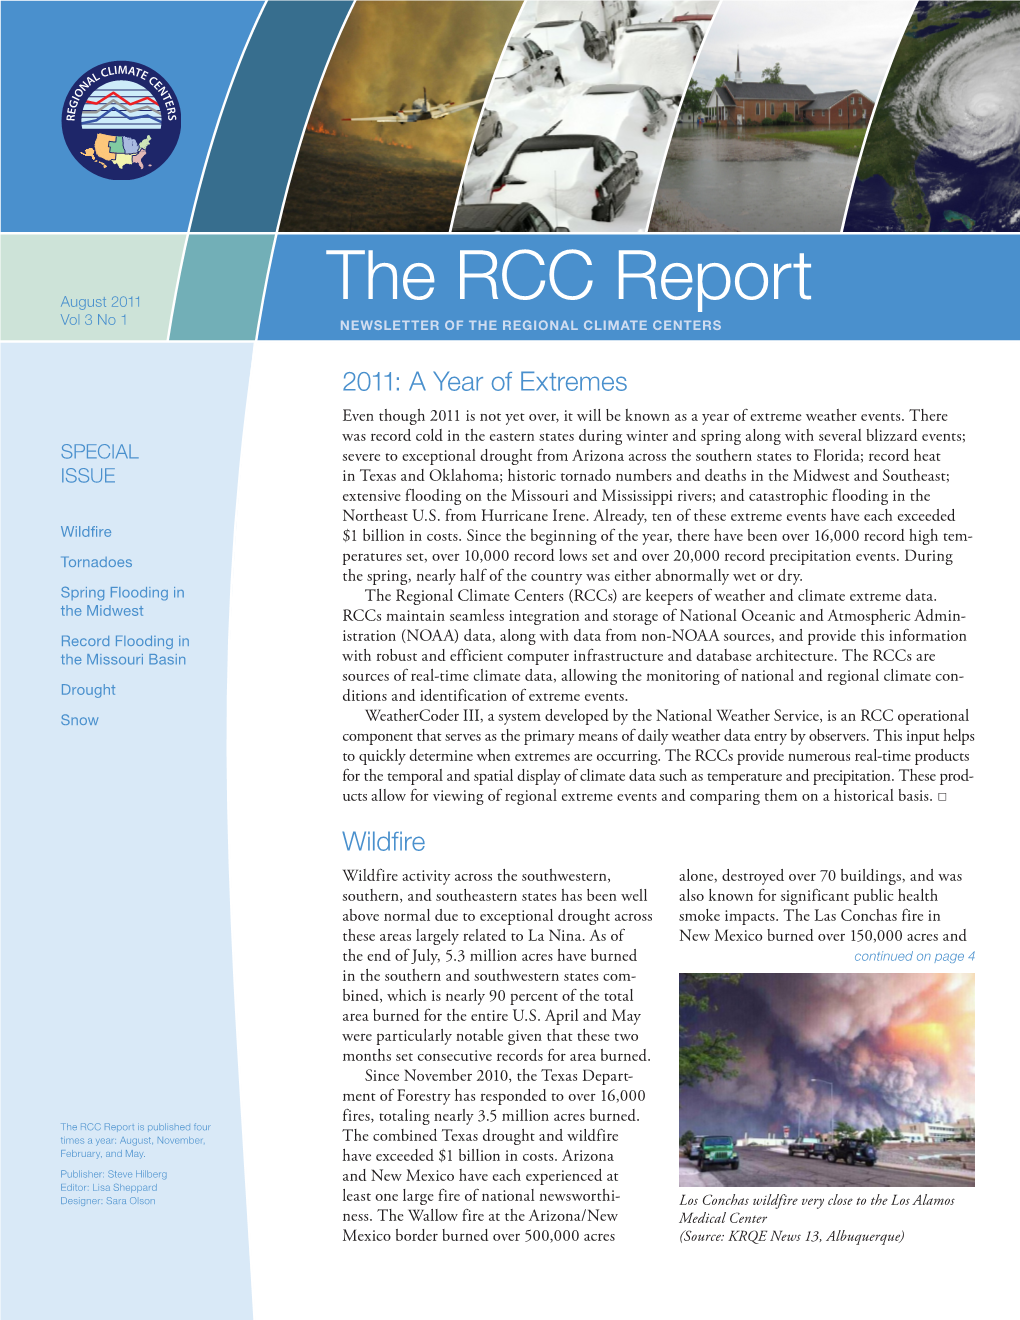 The RCC Report Vol 3 No 1 NEWSLETTER of the REGIONAL CLIMATE CENTERS